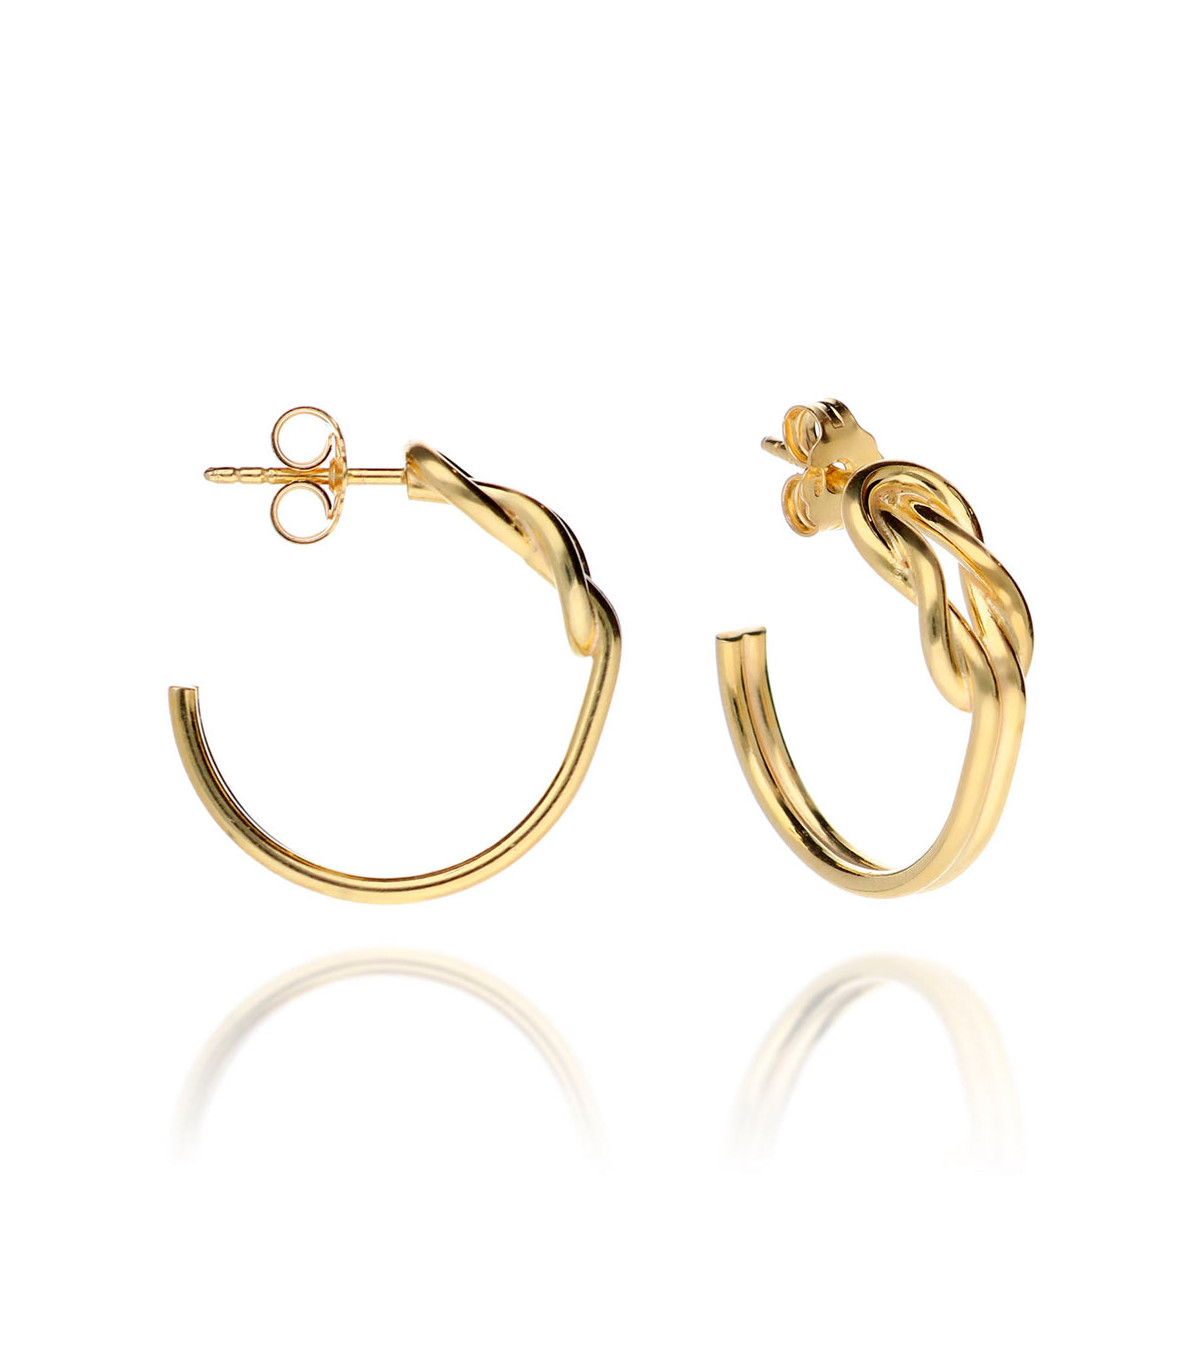 Yellow Gold Circle Hoop Earrings | Autumn and May | Designed in London